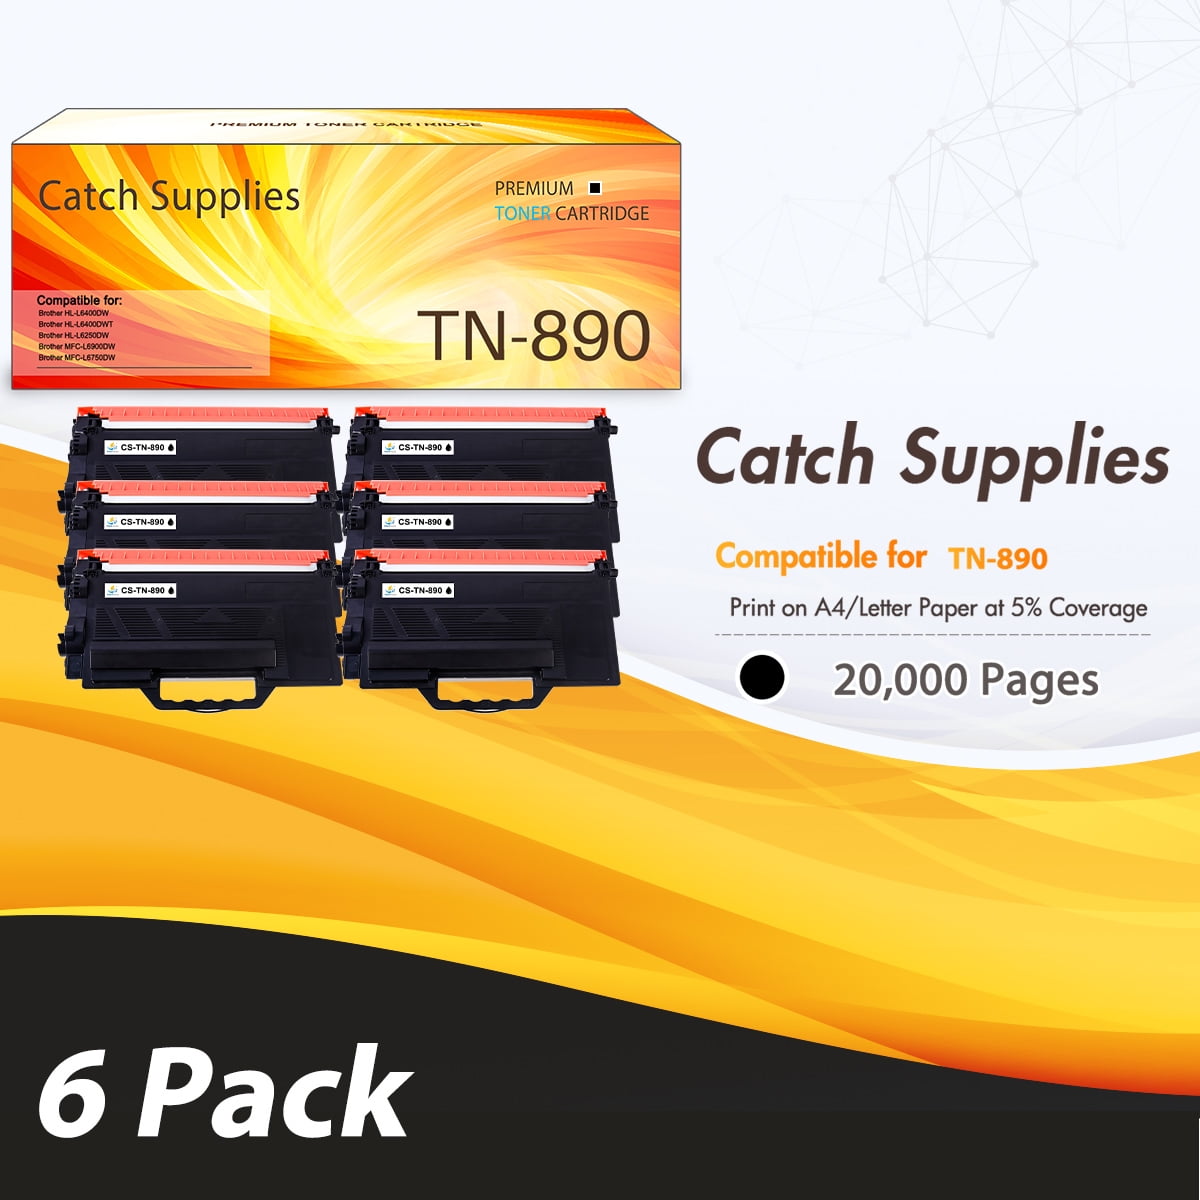 Catch Supplies 10-Pack Compatible Toner for Brother TN-890 Work